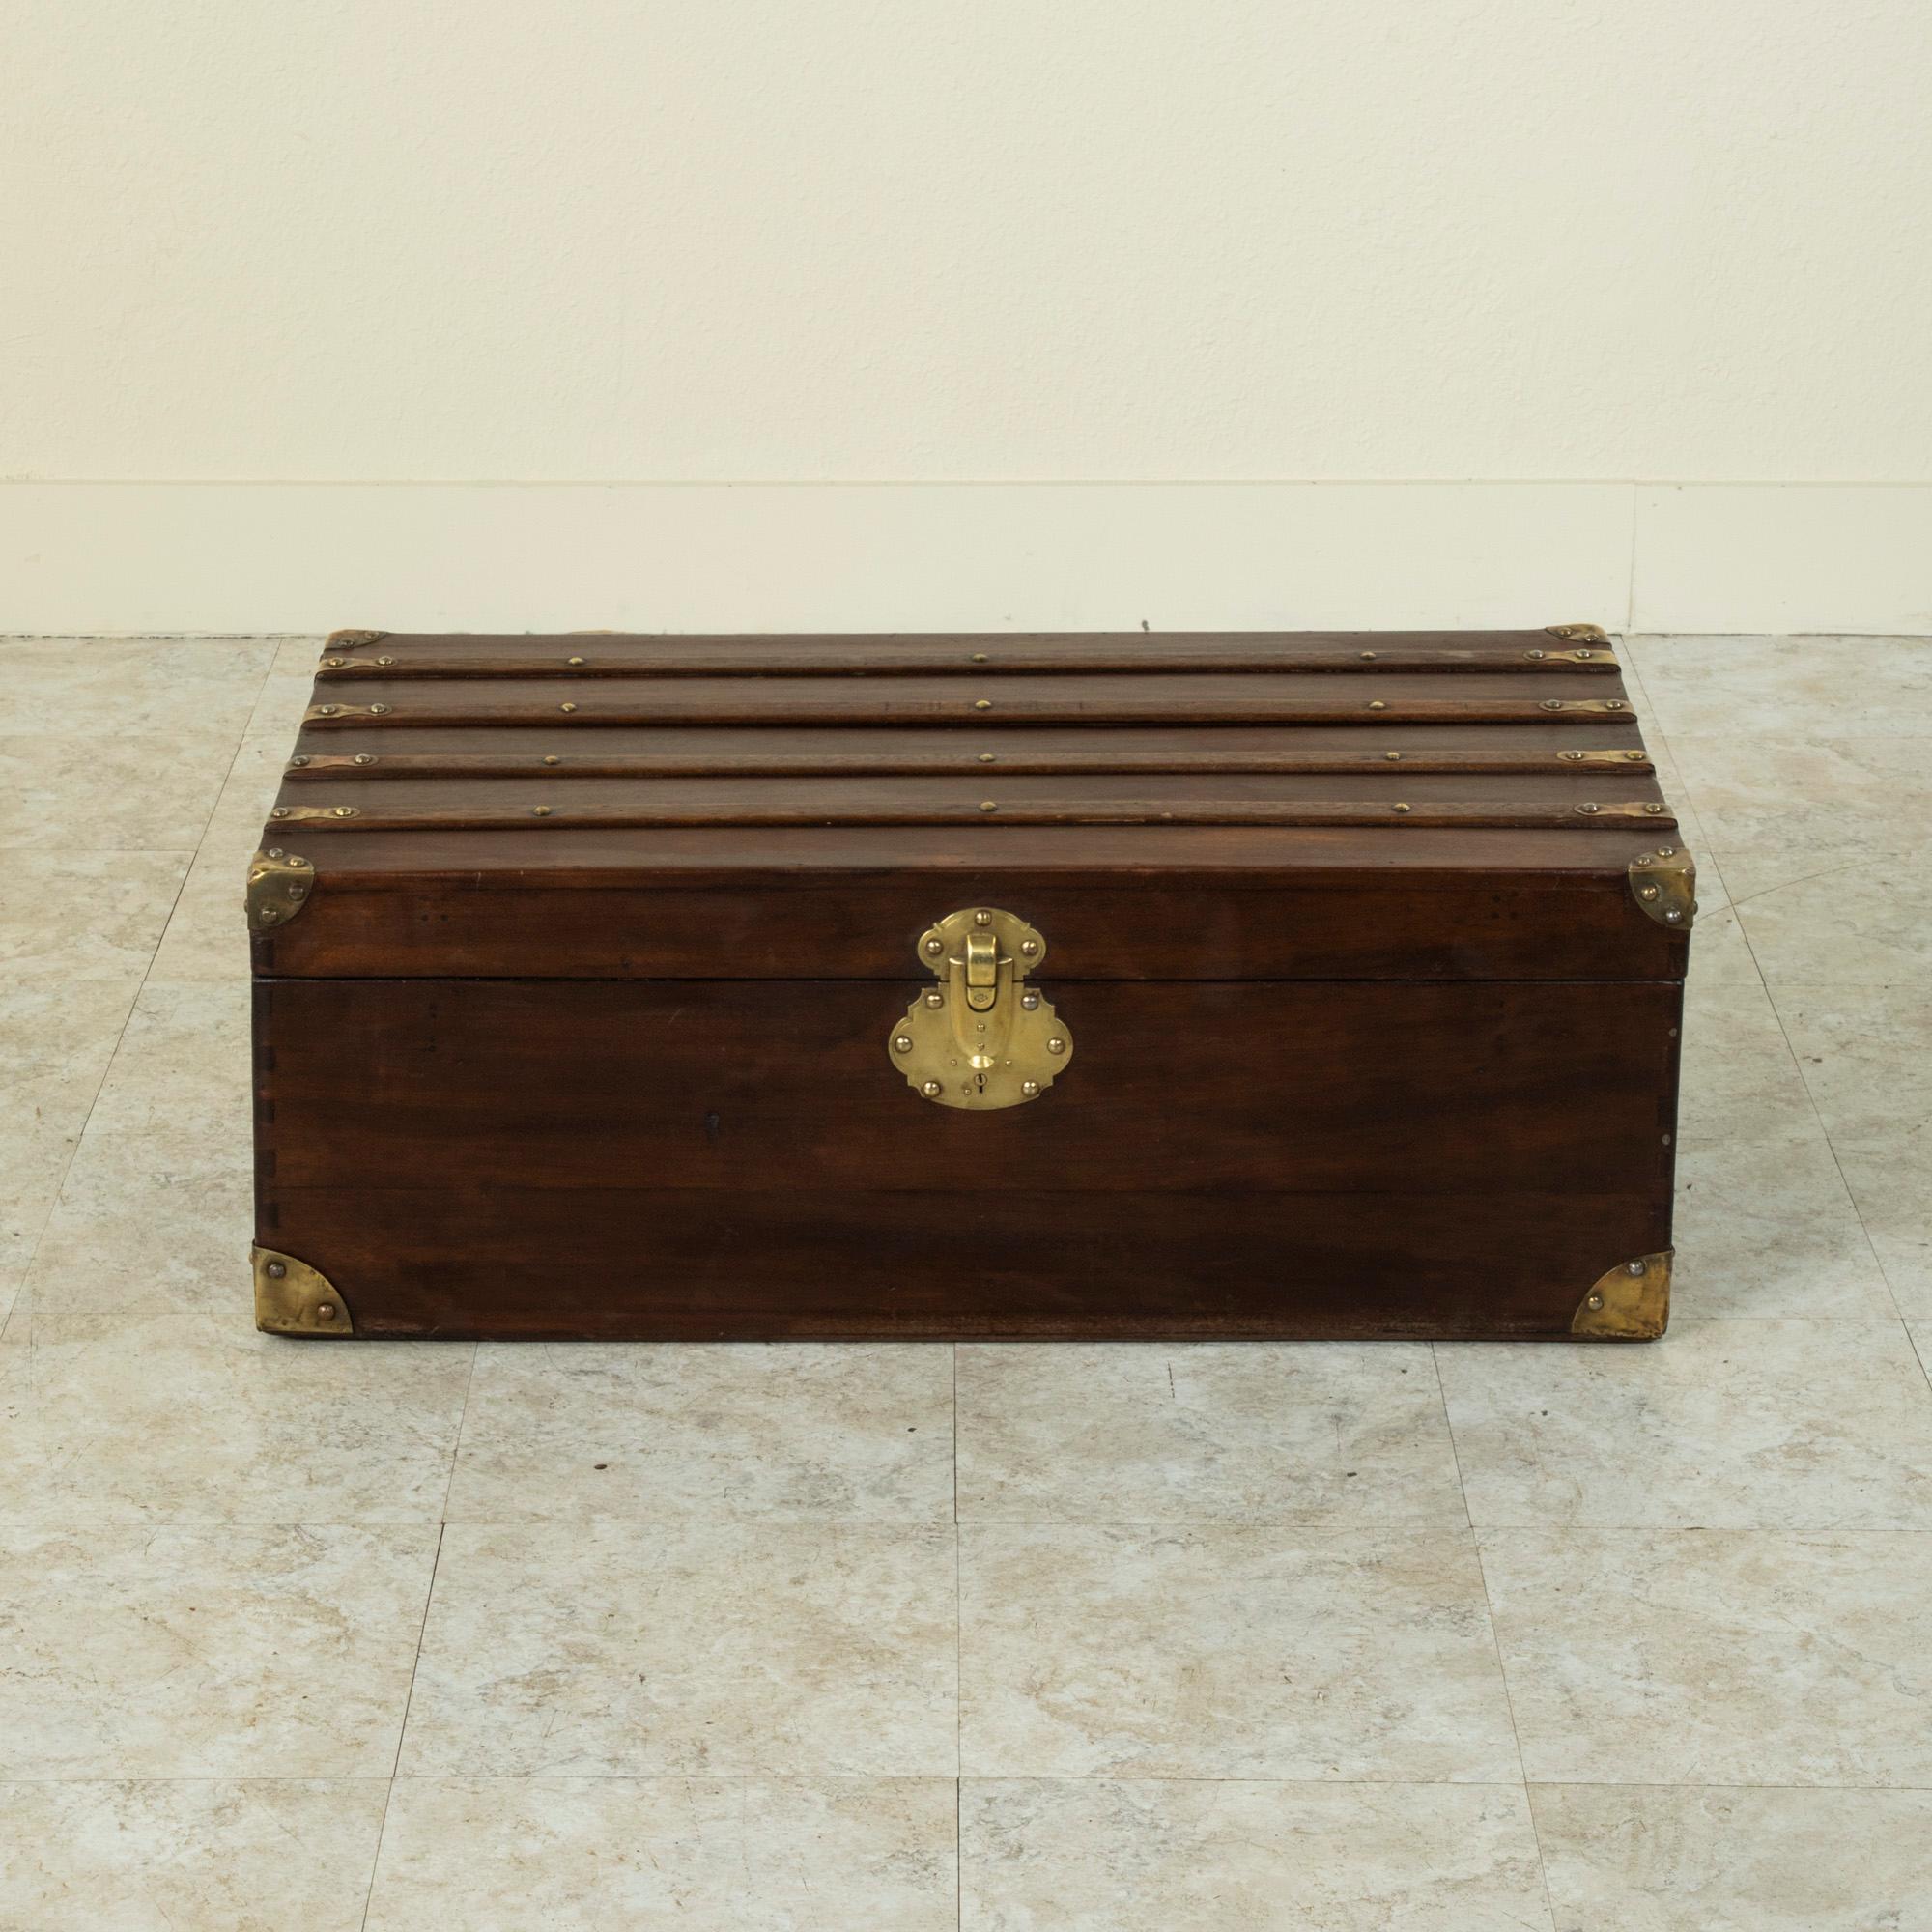 This French walnut steam trunk from the turn of the 20th century features wooden runners detailed with brass rivets and its original brass locks. Its corners are also capped in brass which offered protection from damage when traveling. The brass